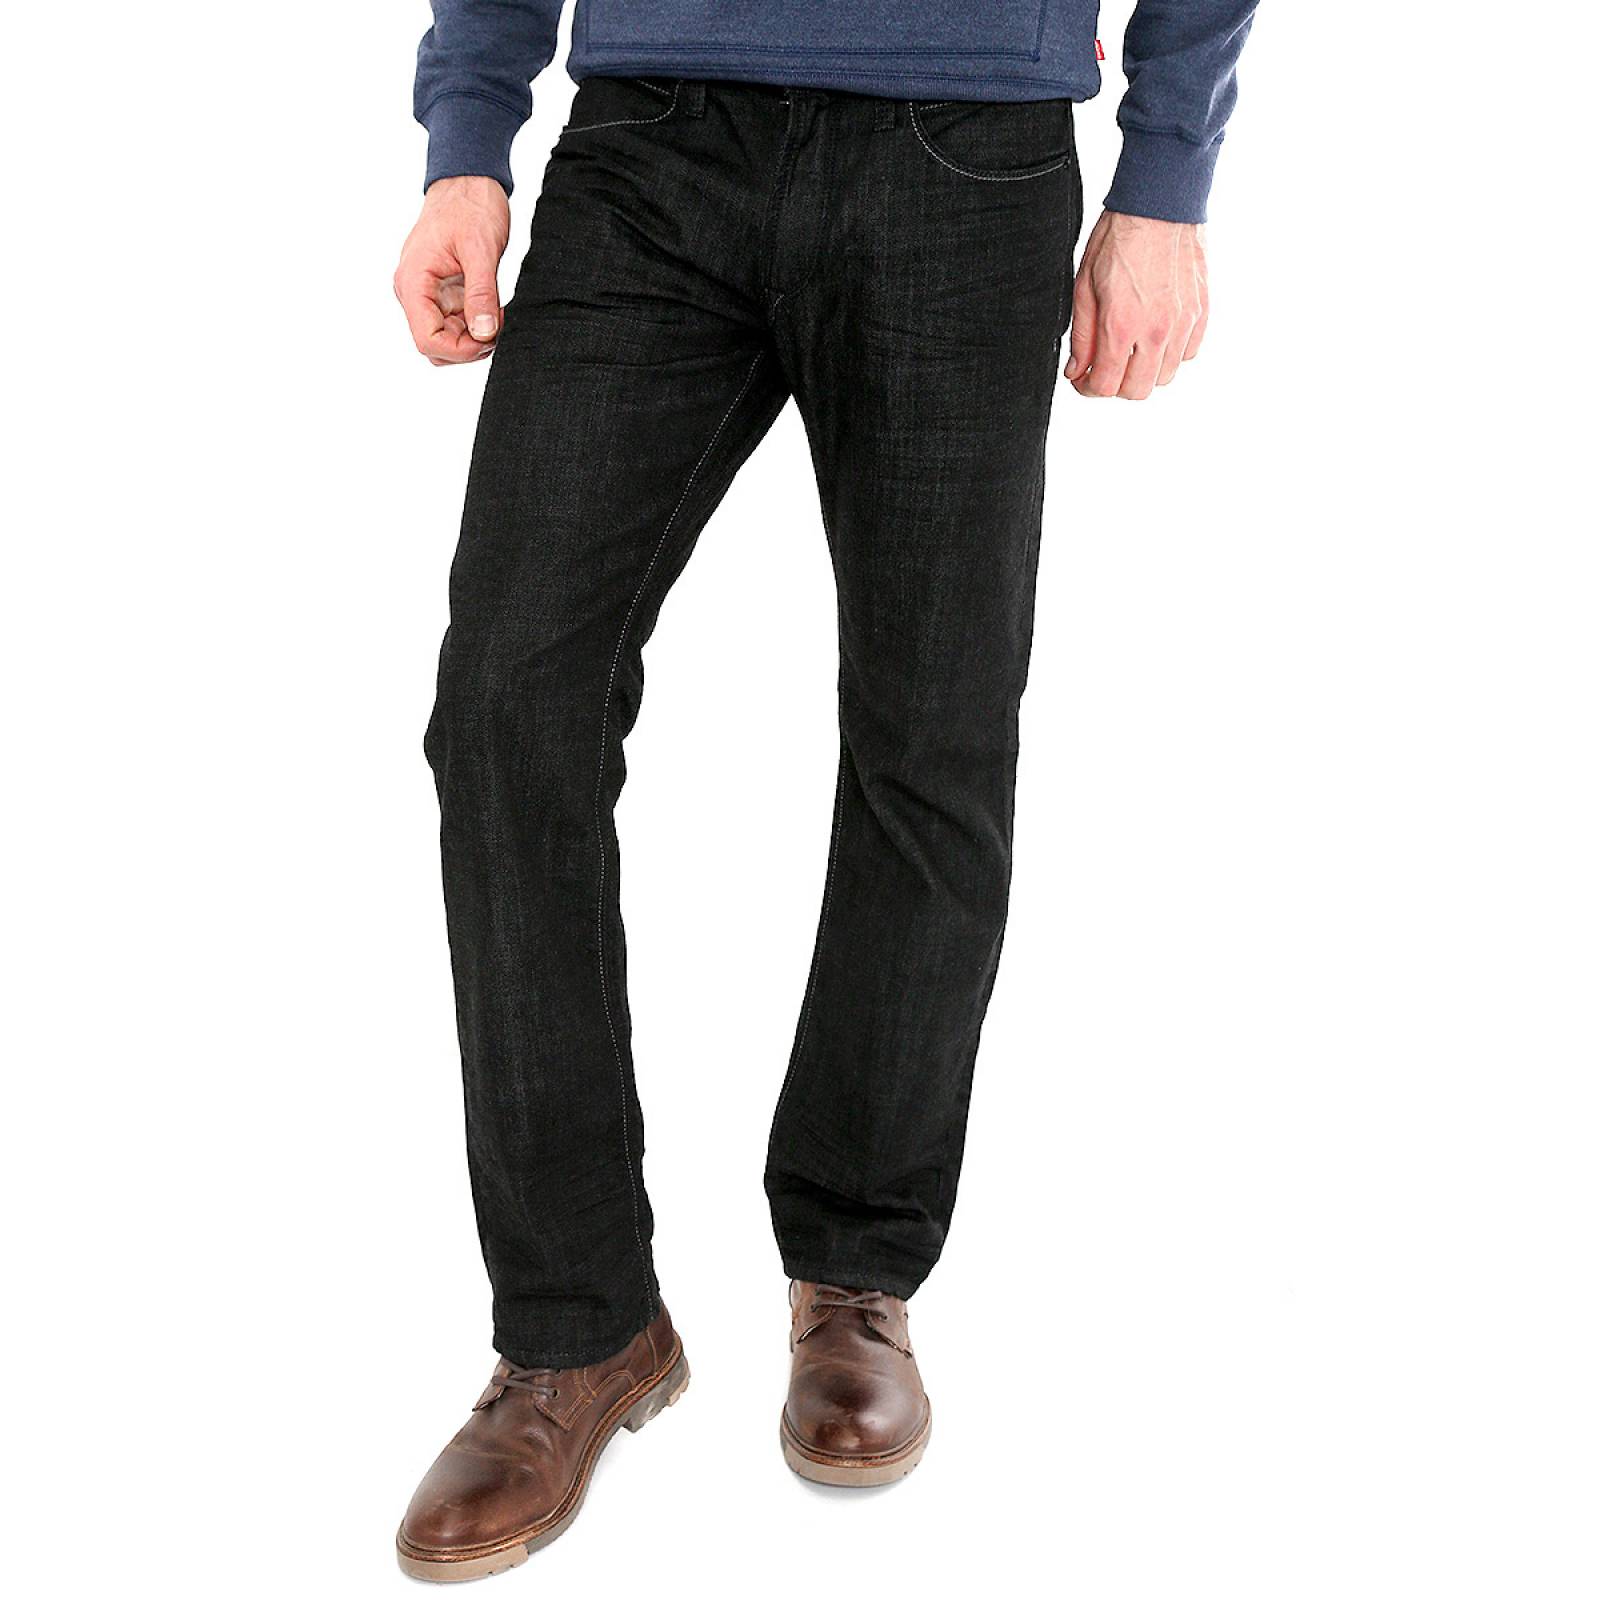 Jeans Negro by Express